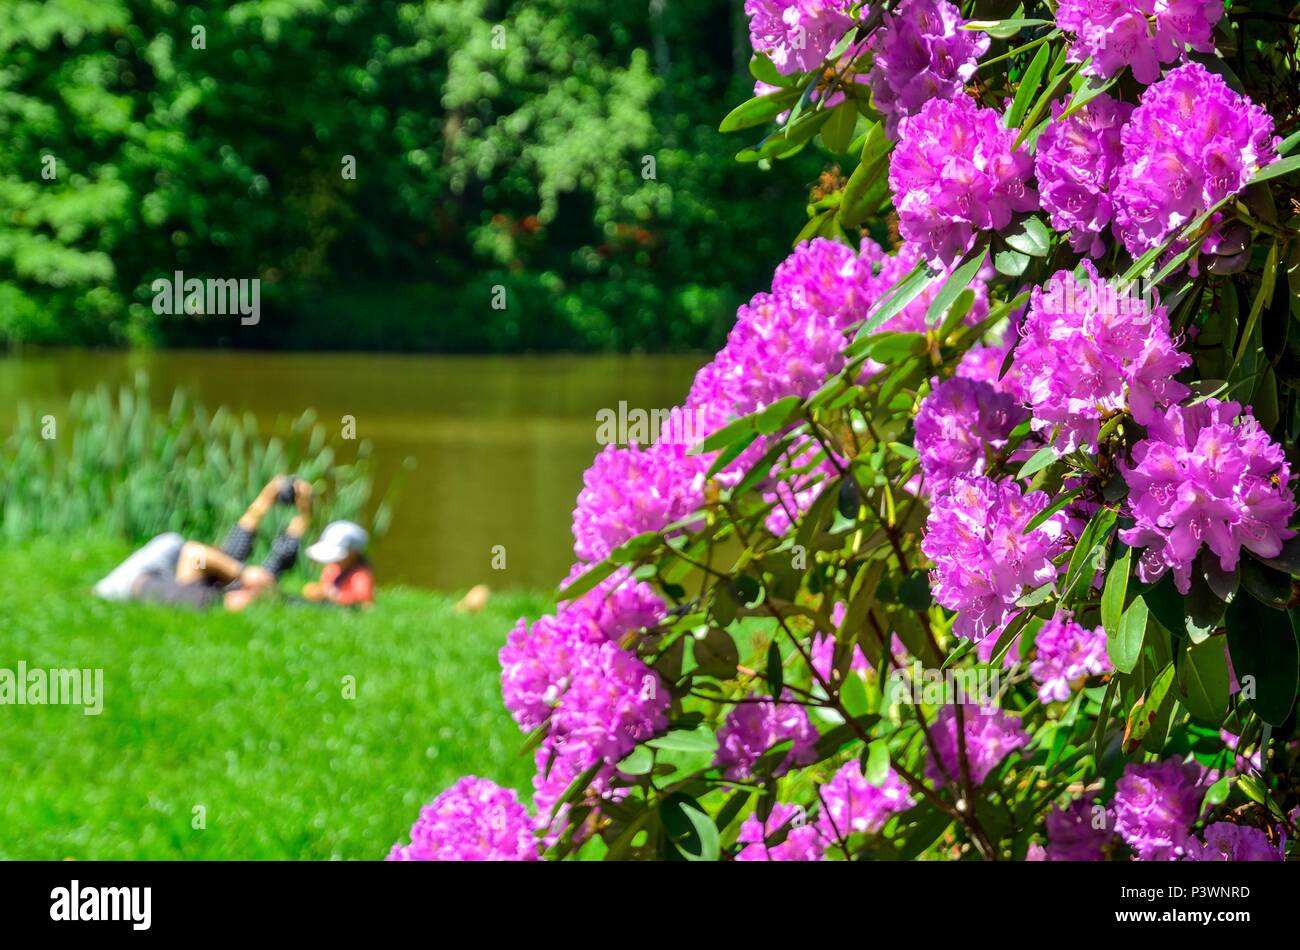 Beautiful flowers in an urban garden. Blooming rhododendrons in the park. Stock Photo